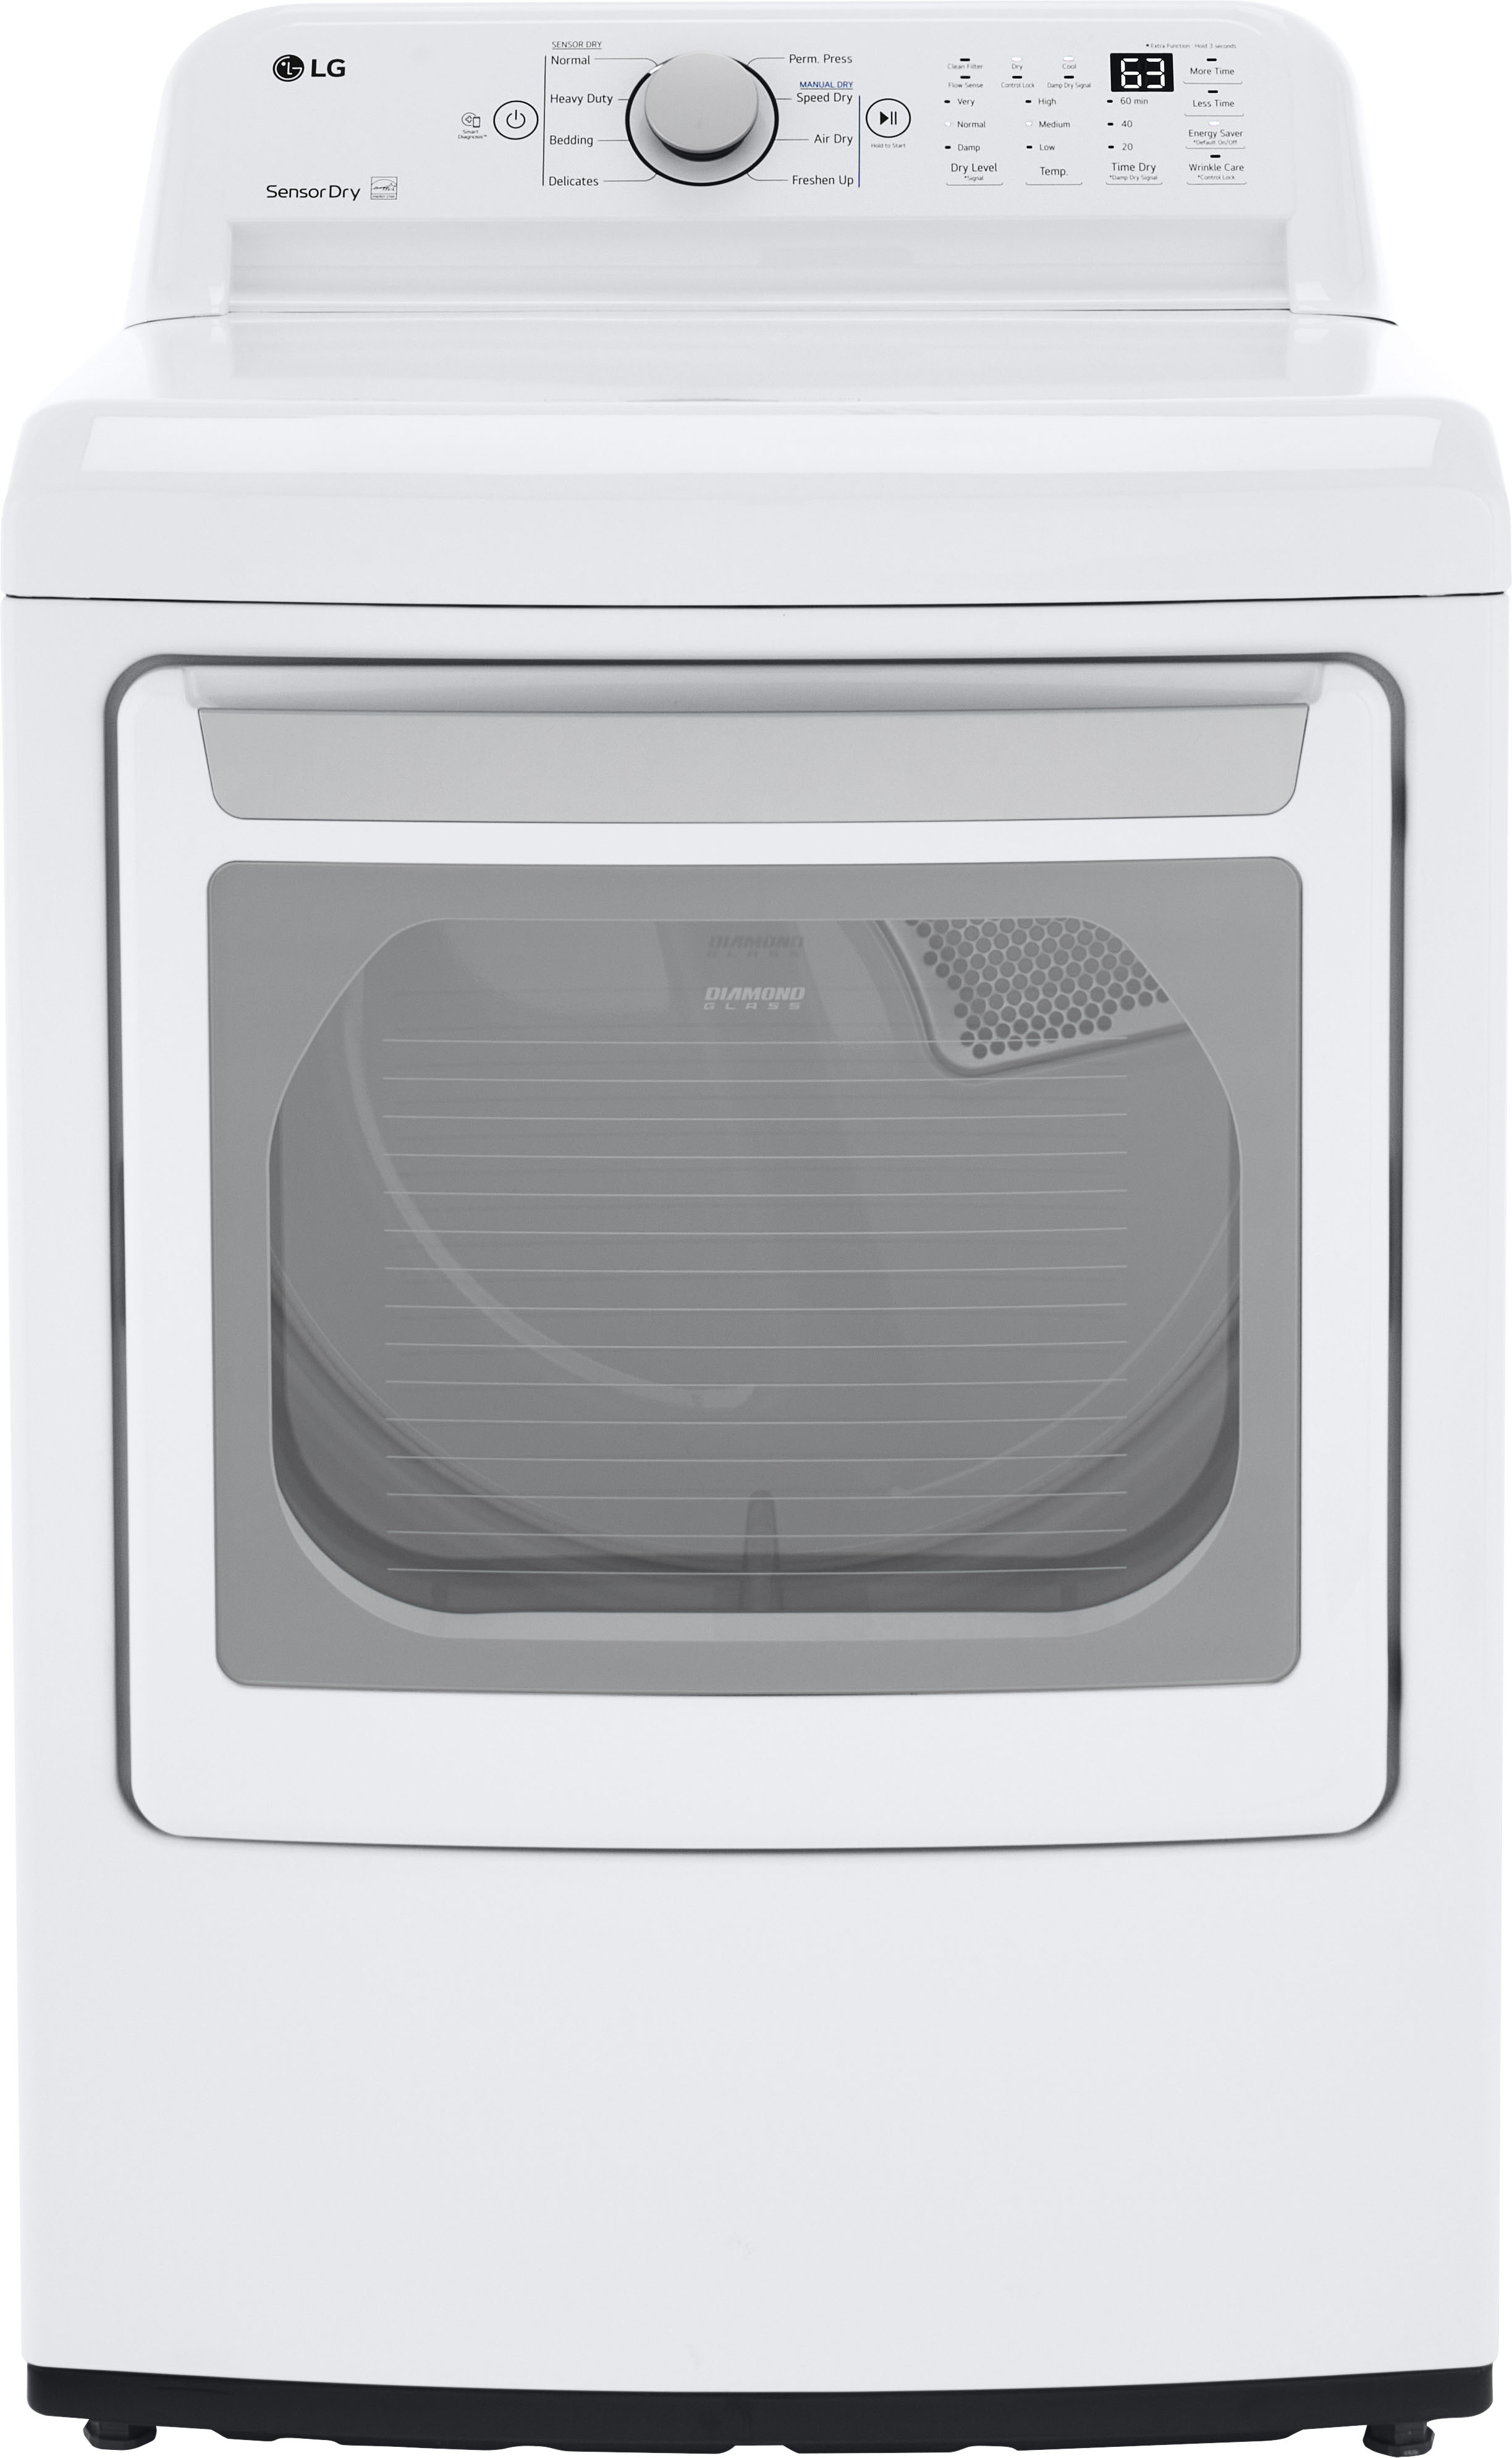 LG 7.3 Cu. ft. Ultra Large Capacity Rear Control Electric Energy Star Dryer with Sensor Dry - White